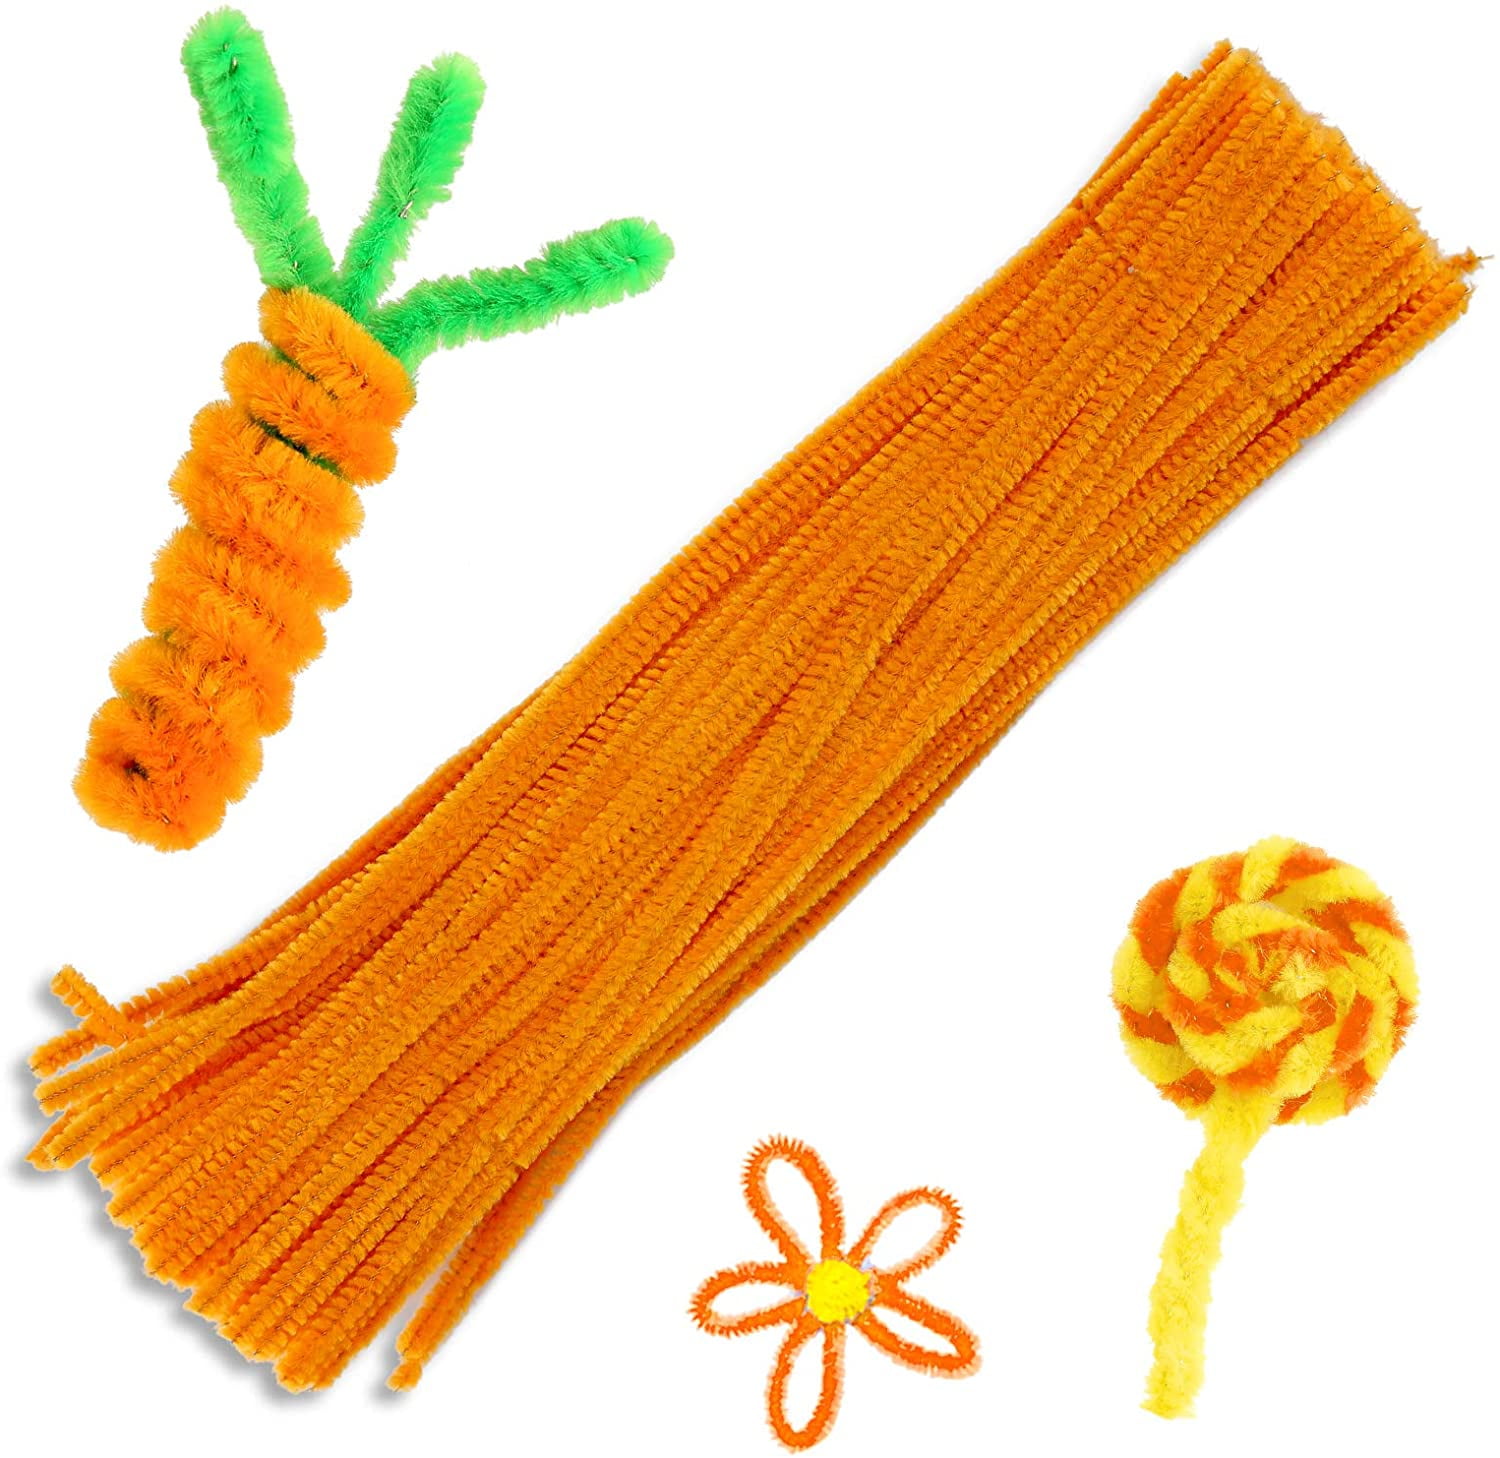 100PC Chenille Stem Solid Color Pipe Cleaners Set for DIY Arts Crafts  Decorations Office&Craft&Stationery Dark Blue 